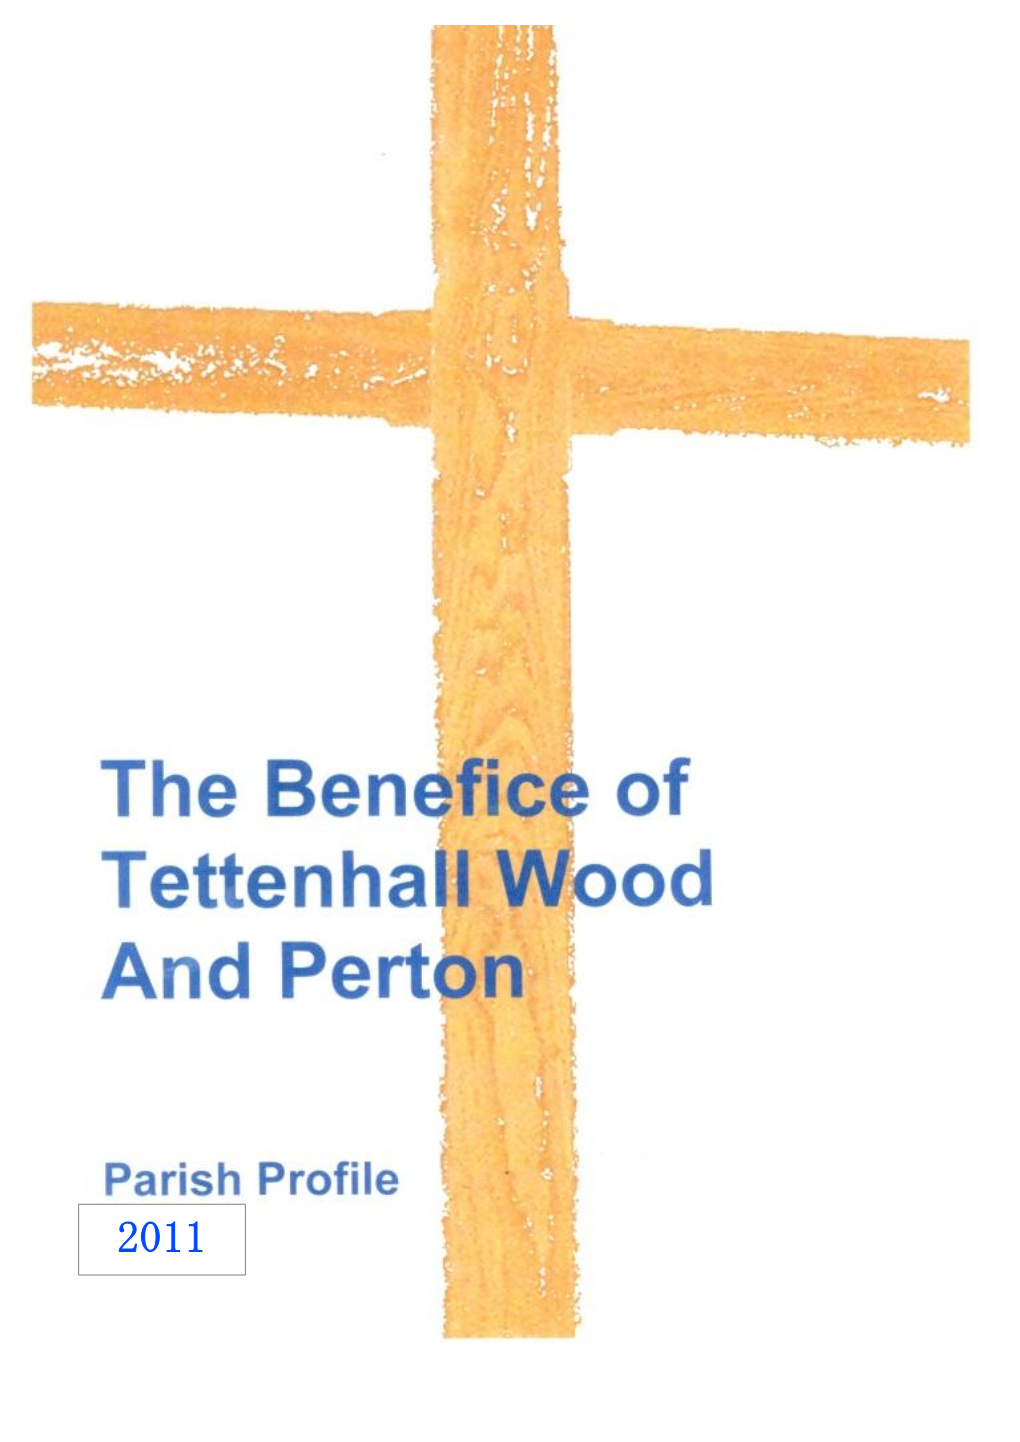 In the Wolverhampton Area and Travel, As There Are Few Opportunities to Work in the Parish